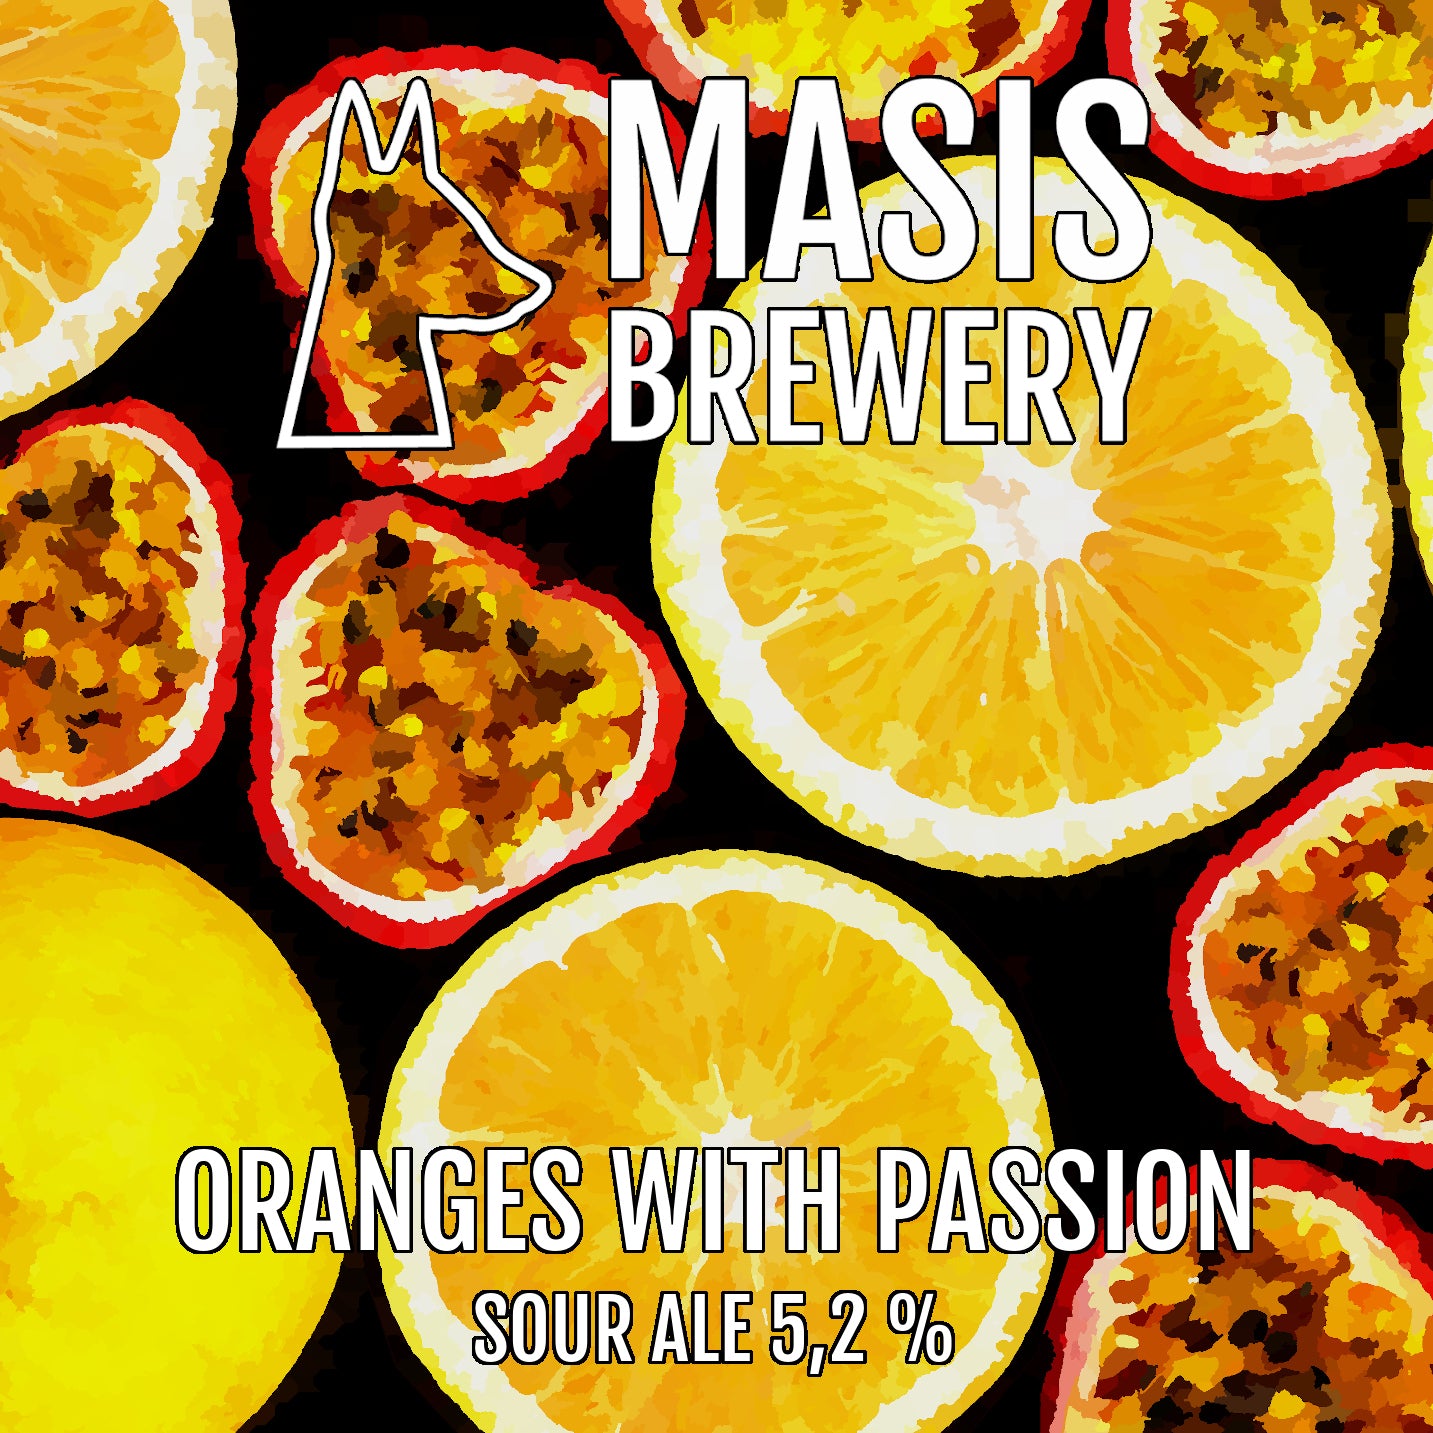 Oranges with Passion